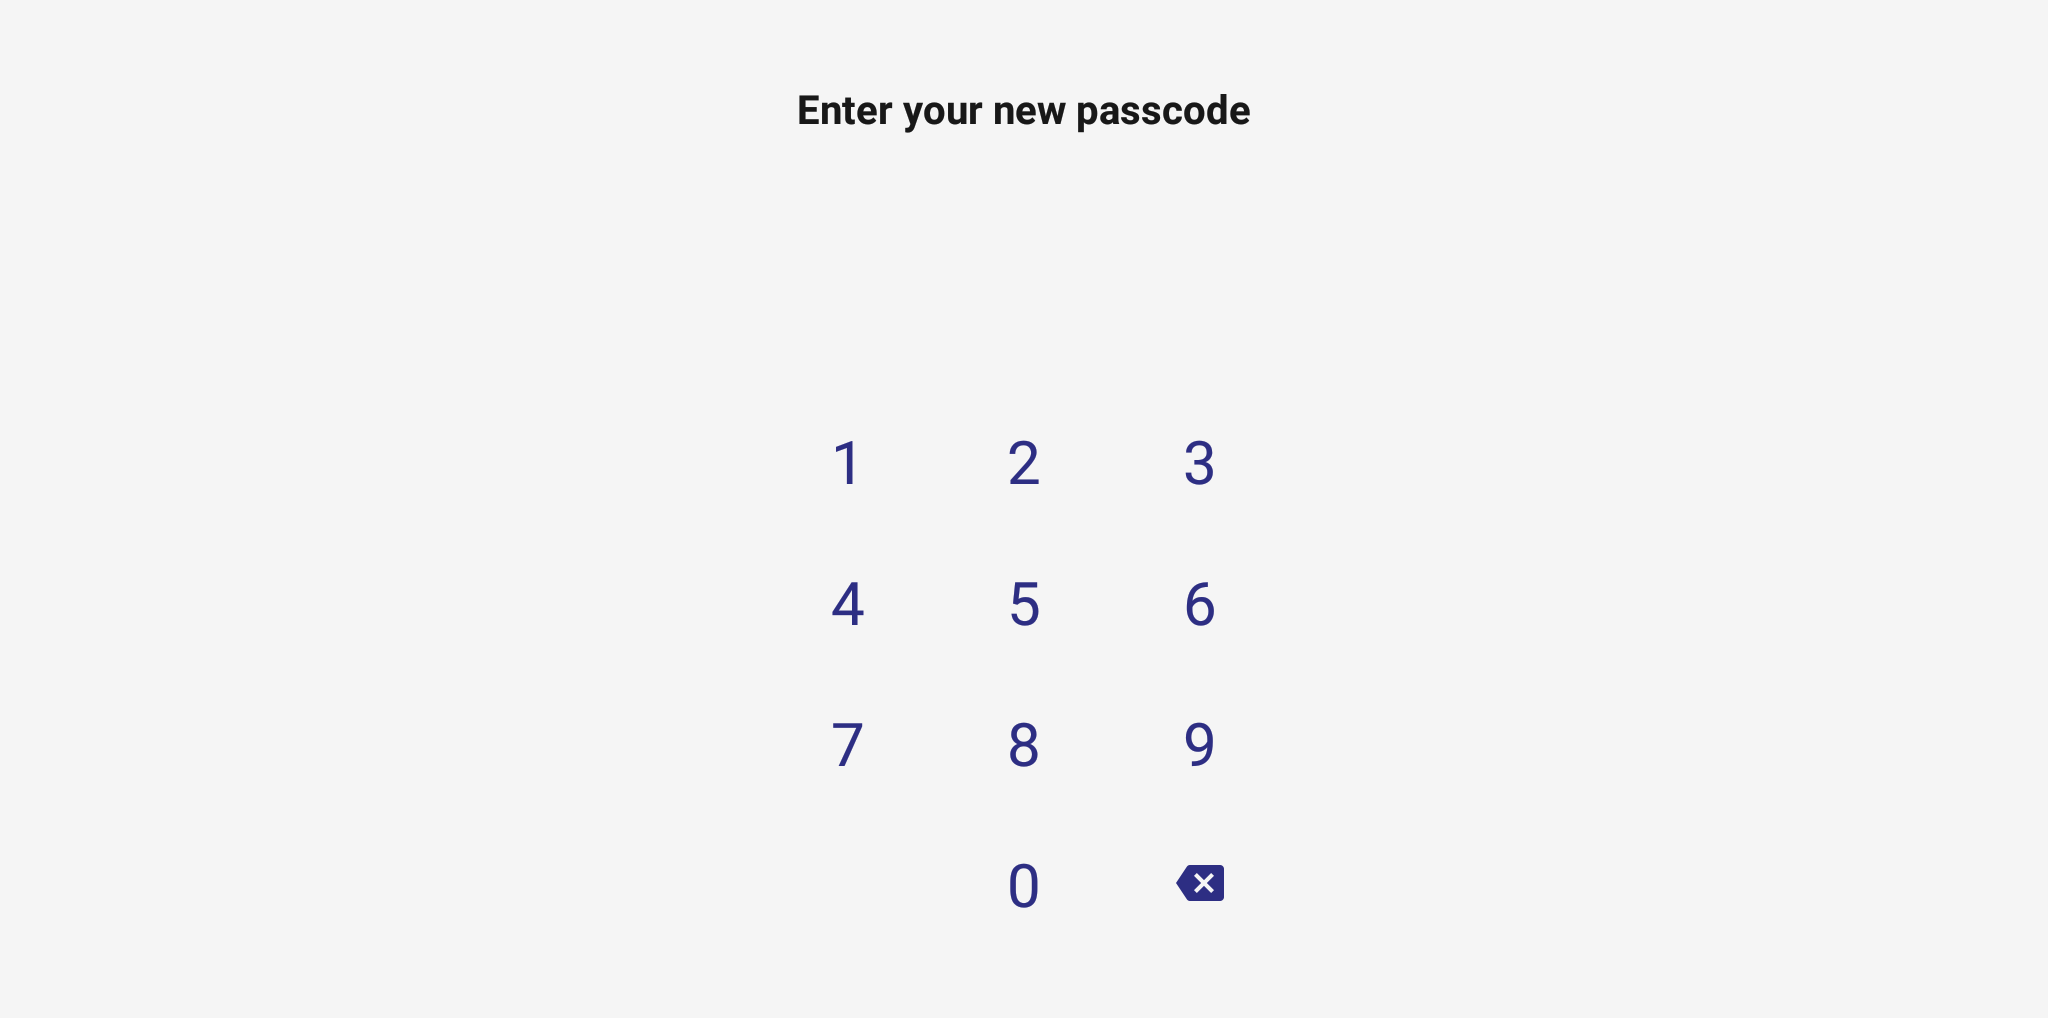 Enter_a_passcode_with_at_least_four_numbers.png